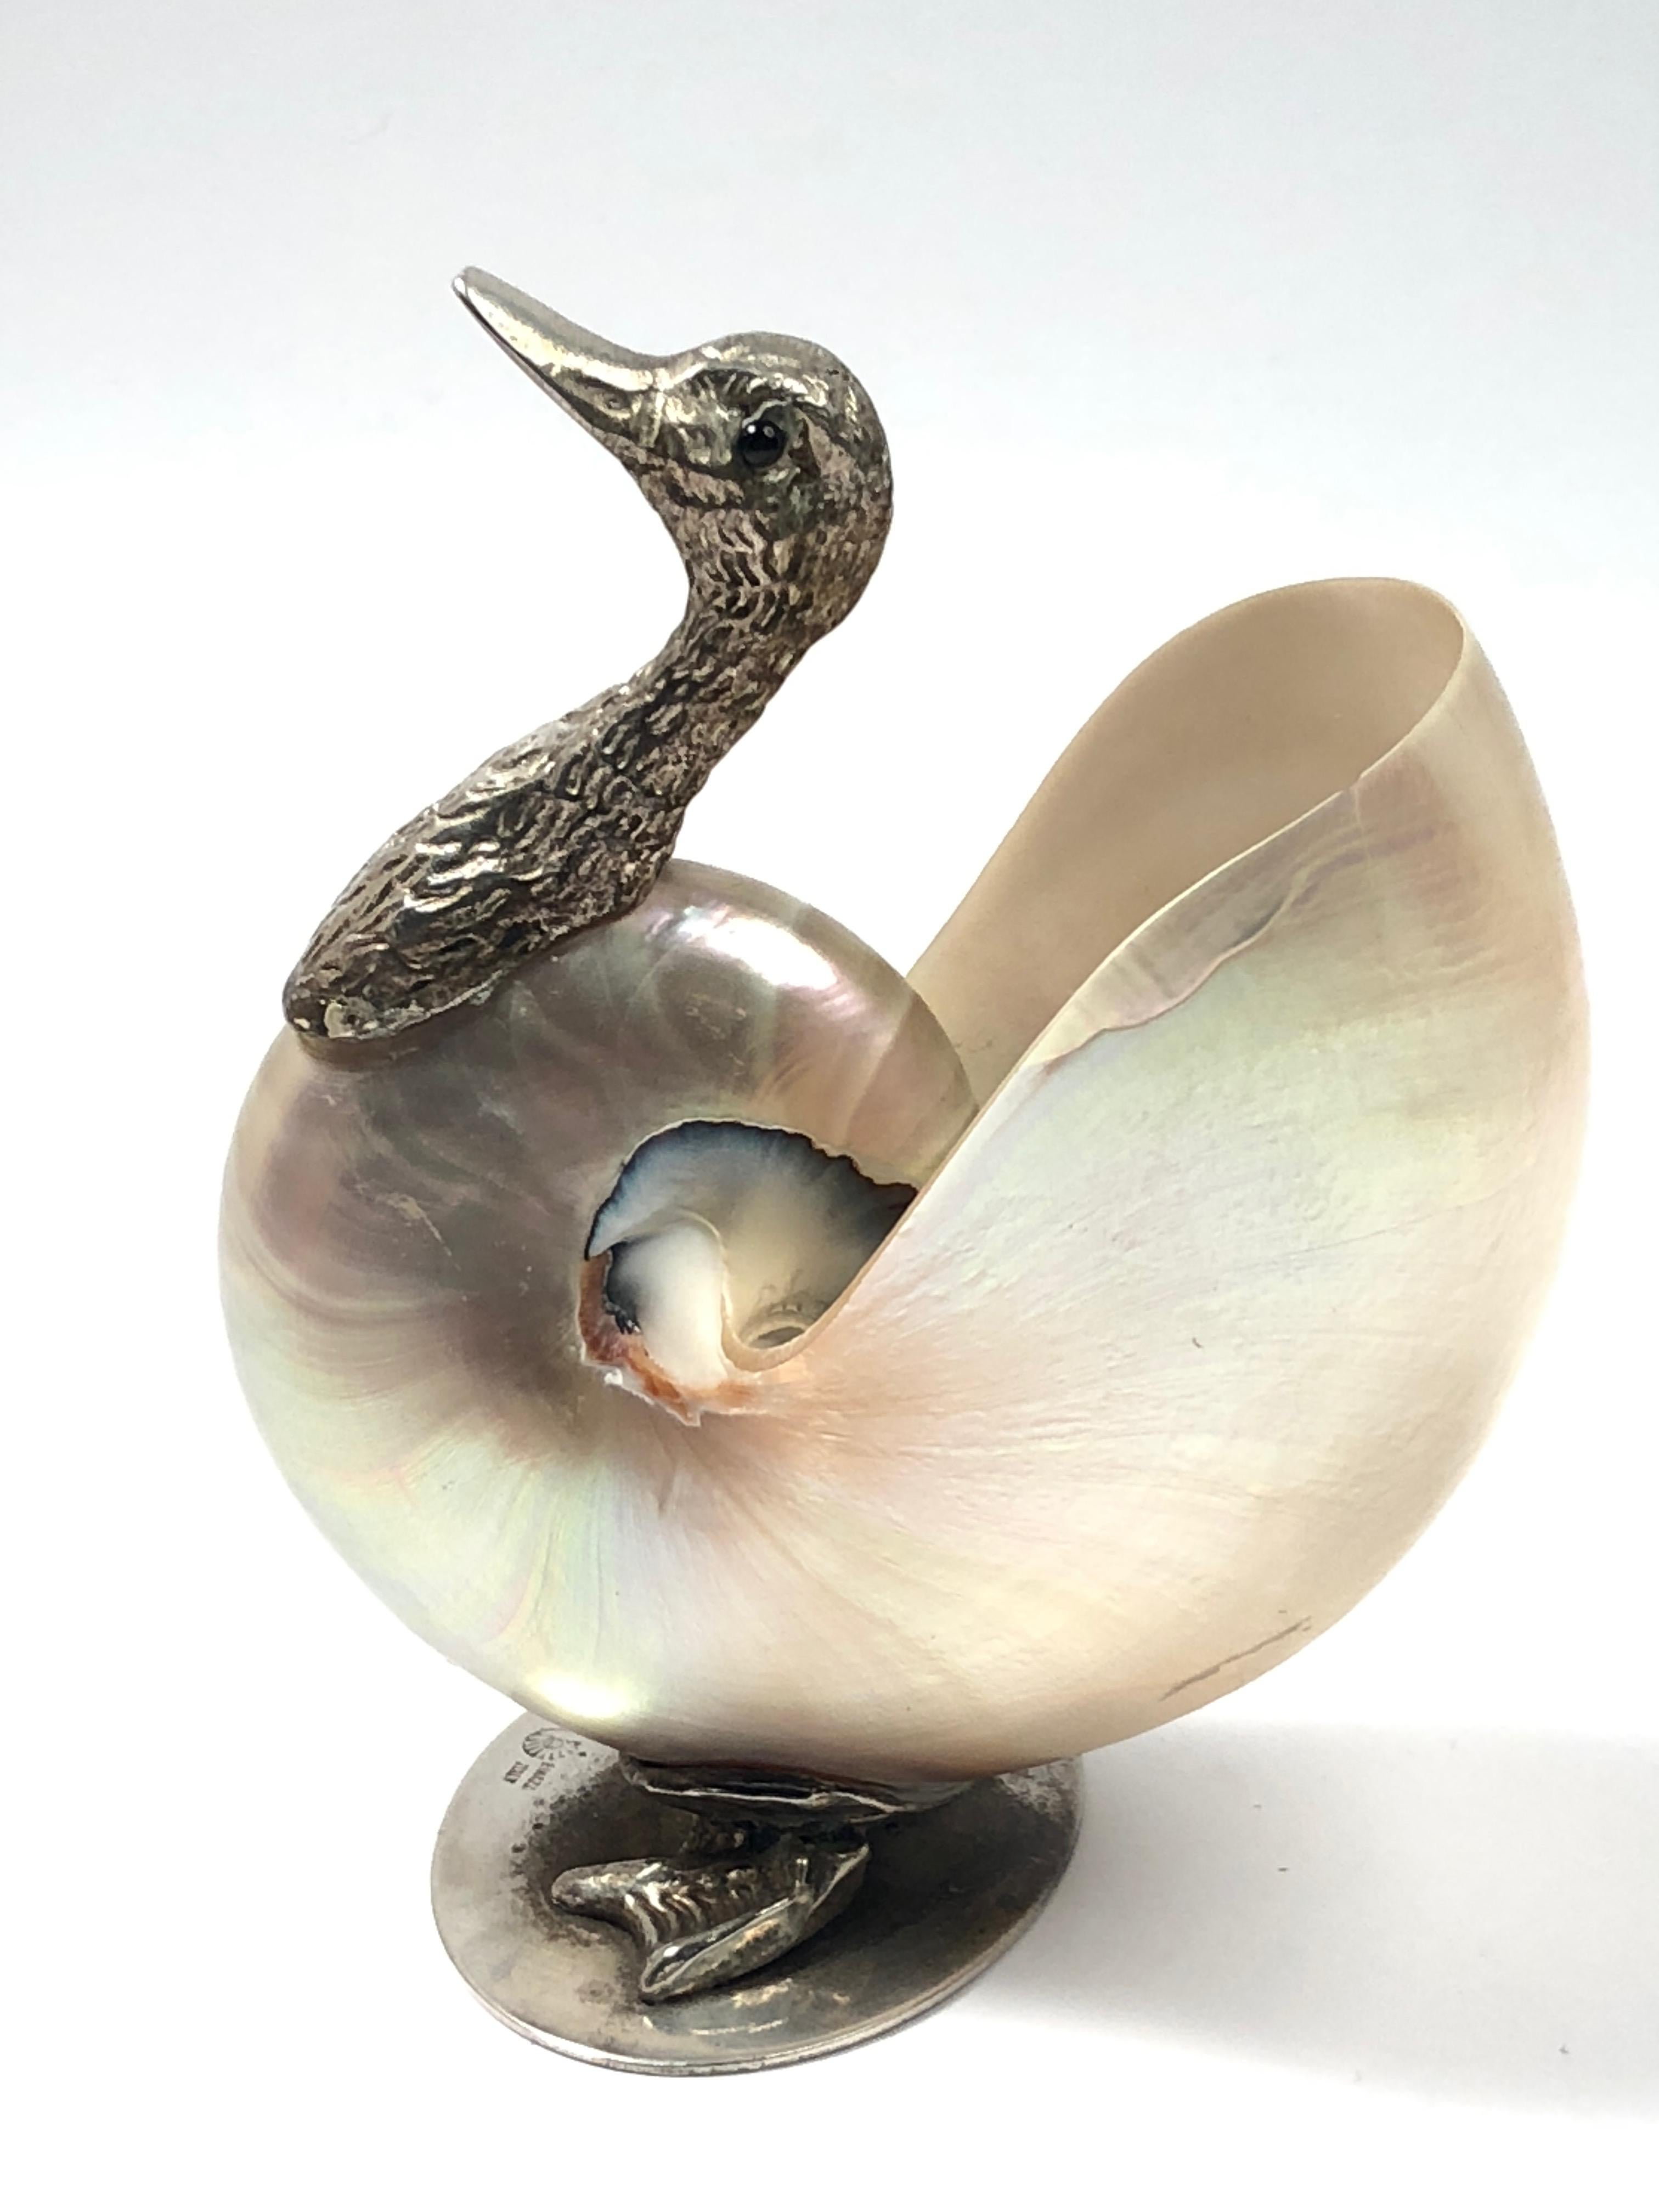 Metalwork Rare Signed Binazzi Goose Shell Trinket Bowl Sculpture, 1970s, Italy For Sale